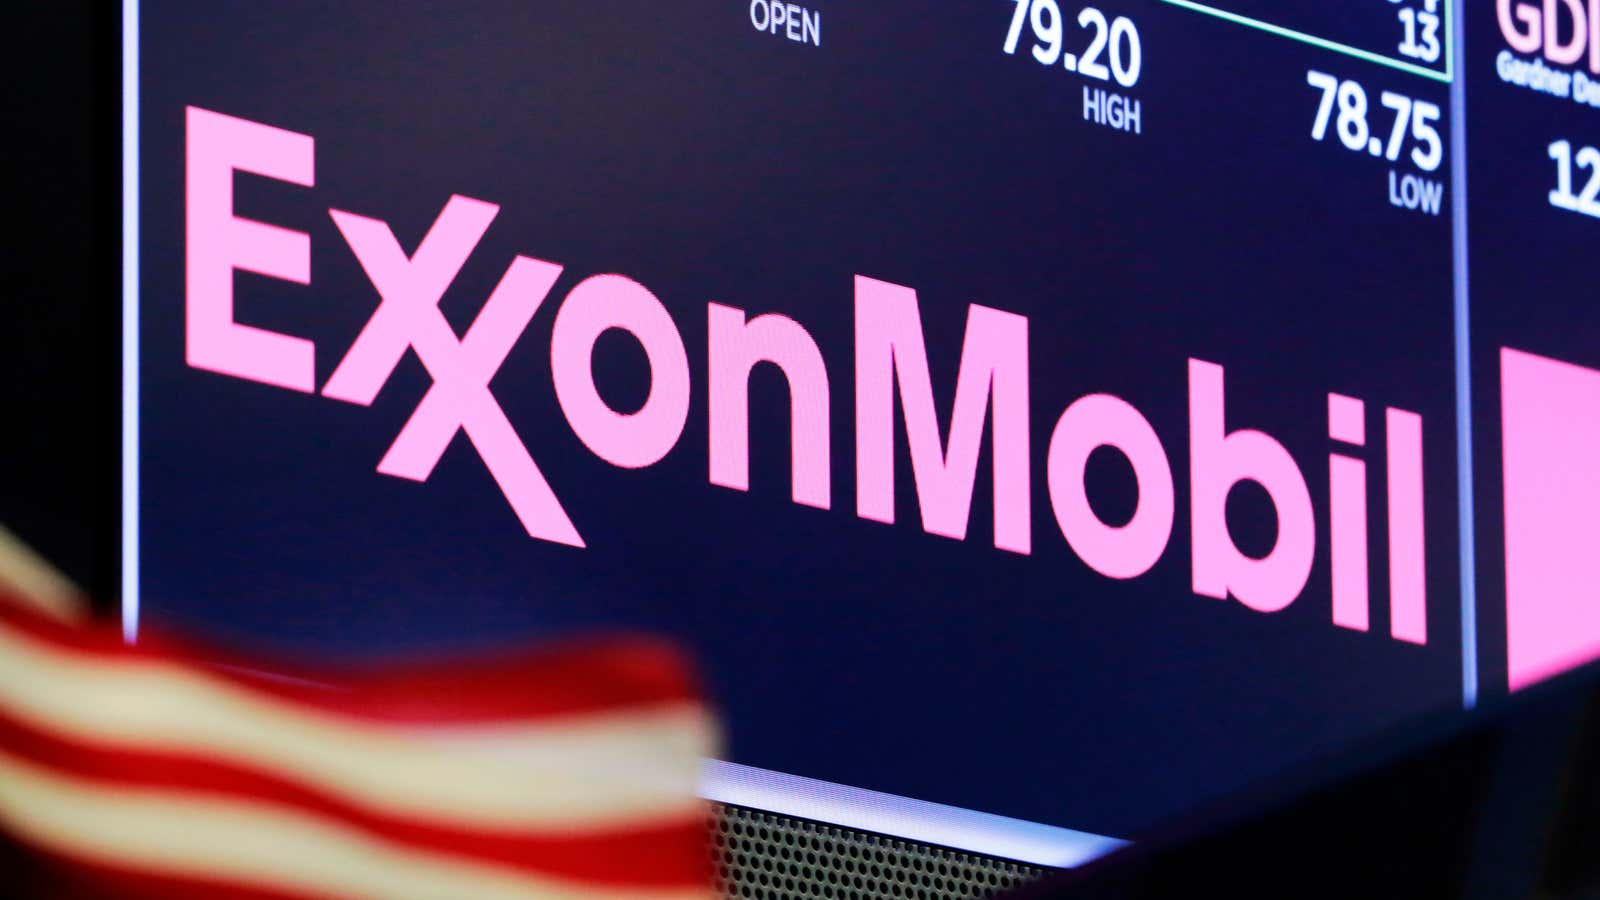 ExxonMobil used to be one of the world’s most powerful companies.